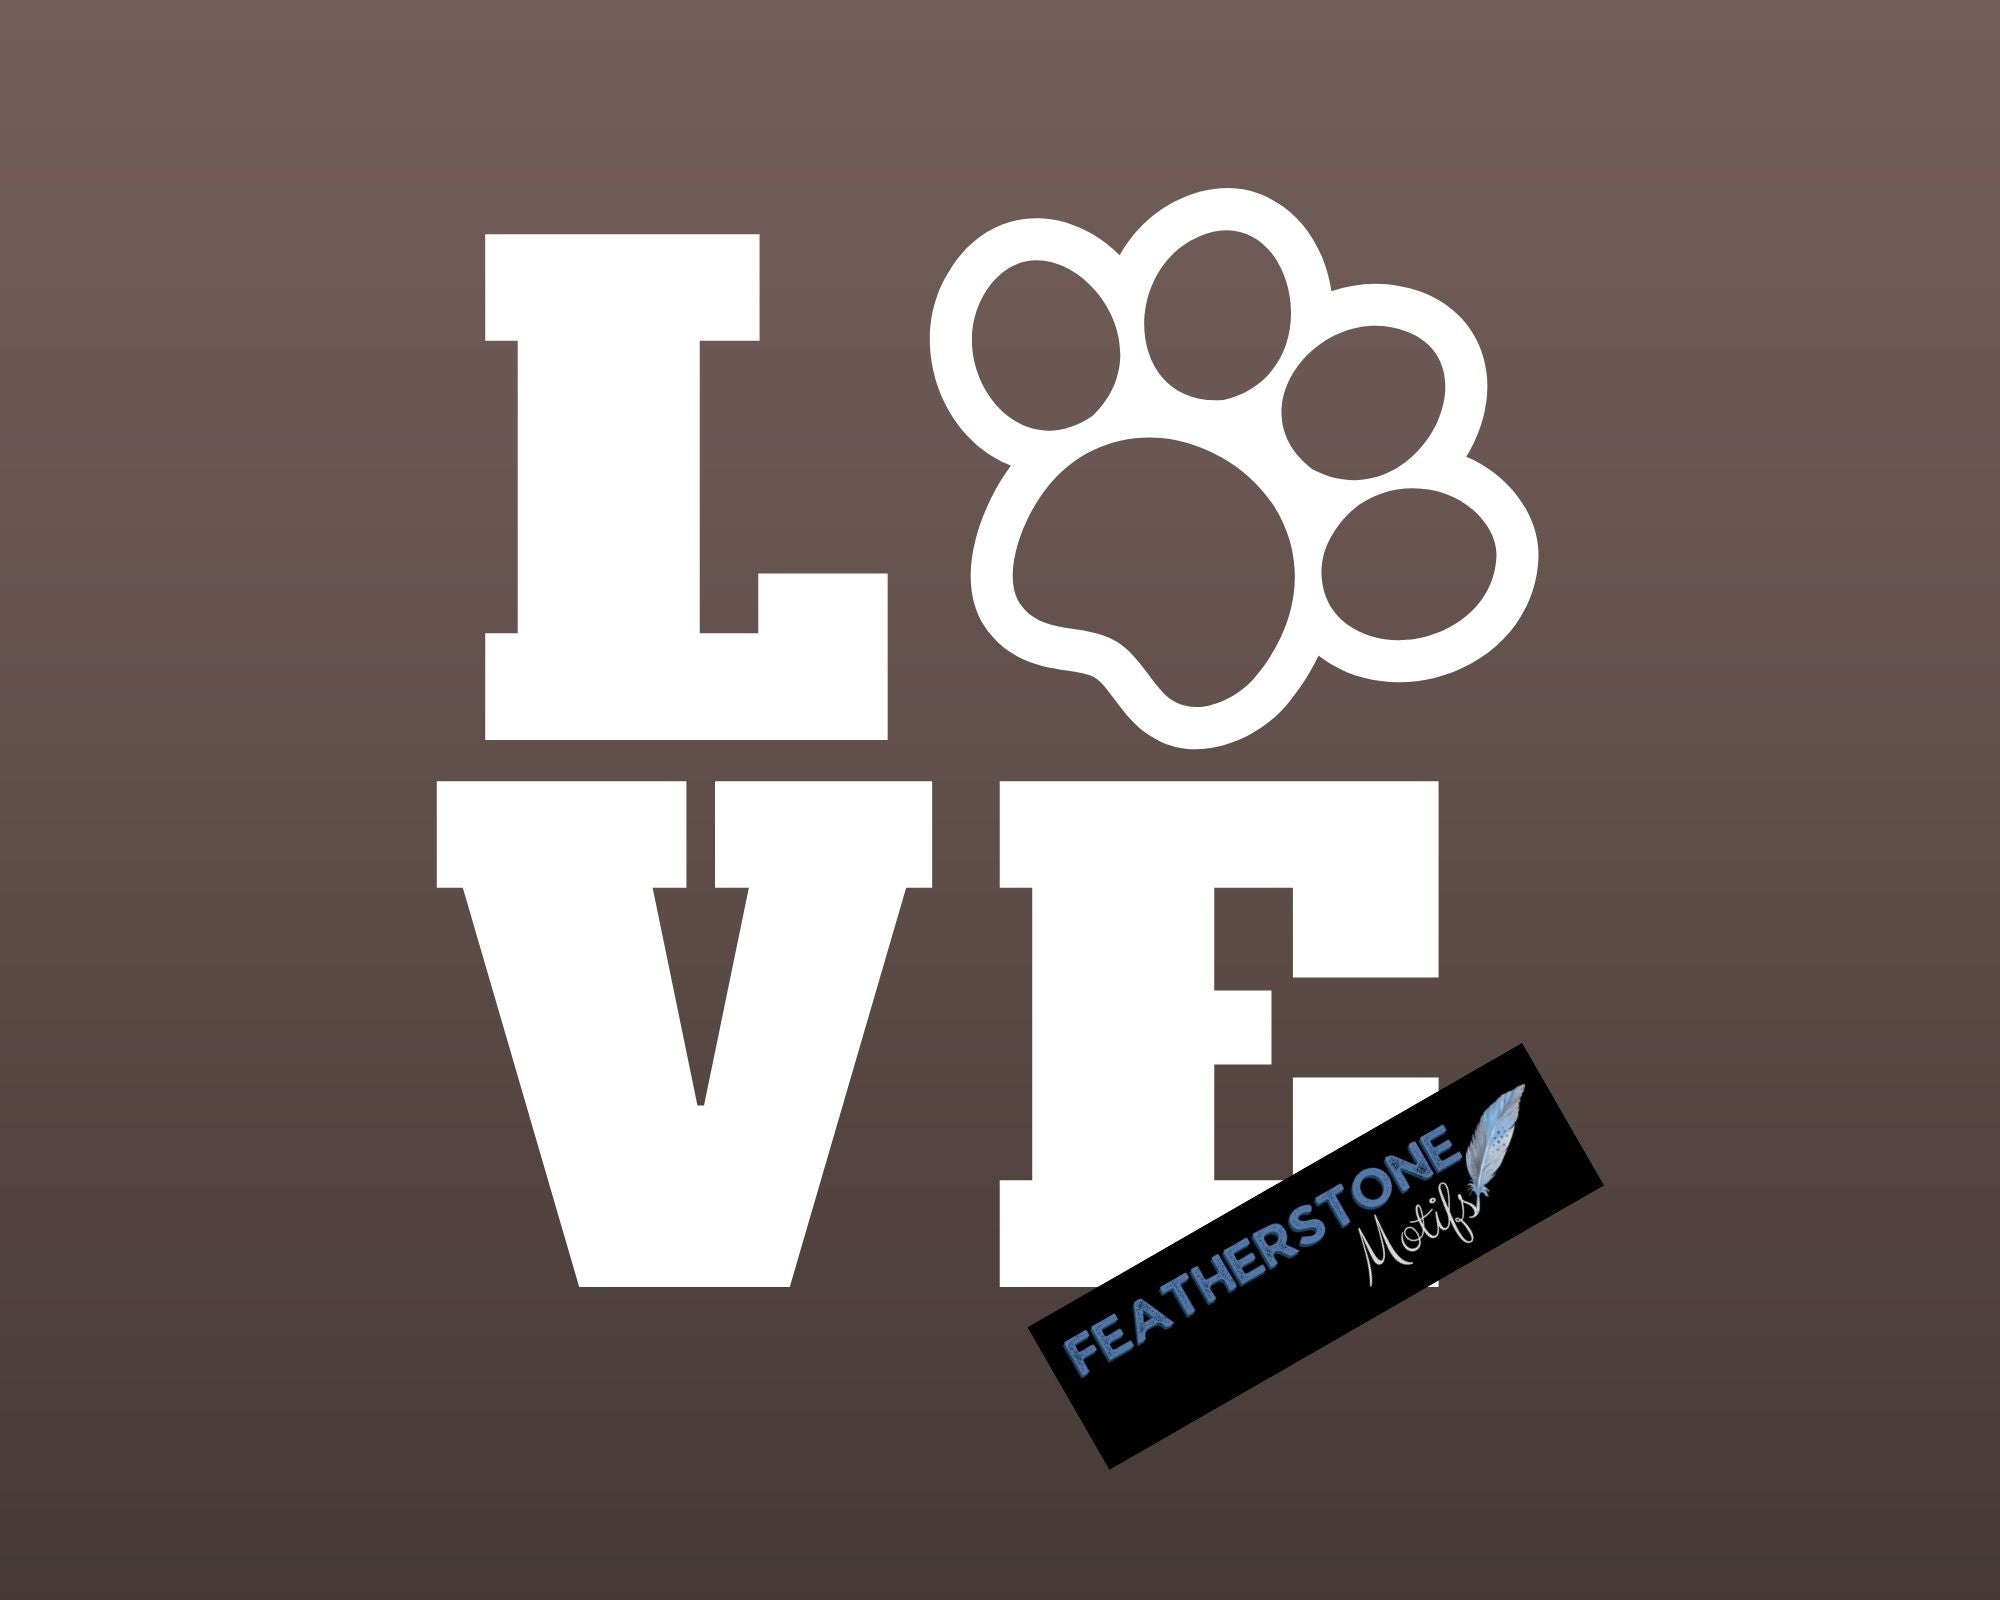 Love your pets? Then show it with this paw love square! Available in 4 sizes and 10 colors, these vinyl decals make great gifts for everyone. This image shows the Paw Love Square on a brown background.